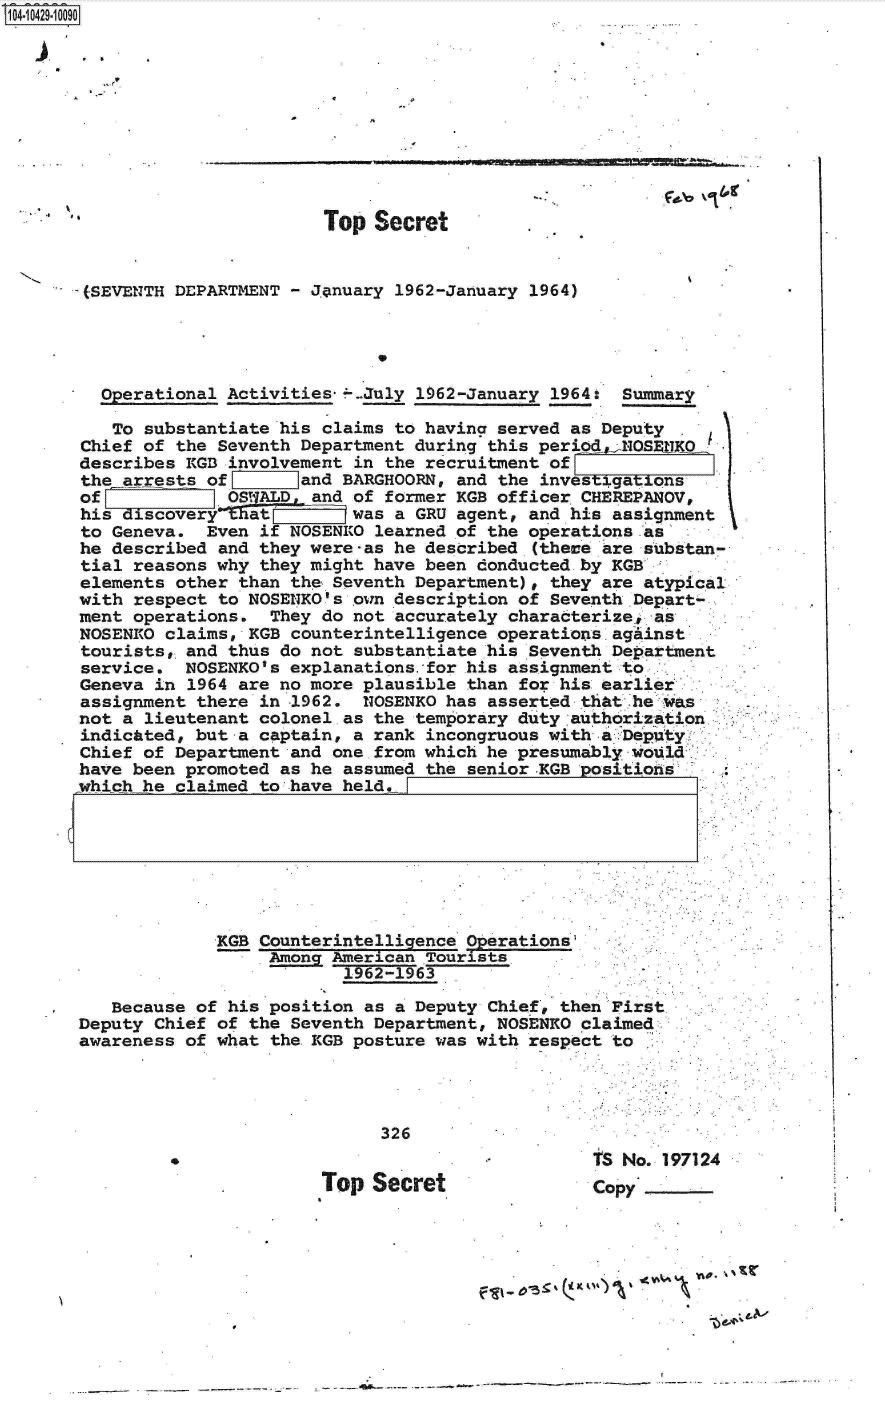 handle is hein.jfk/jfkarch19750 and id is 1 raw text is: 14 i42910090










                              Top  Secret


       (SEVENTH DEPARTMENT - J.anuary 1962-January 1964)


                                   *

          perational Activities*---July 1962-January 1964: Summary

          To substantiate his claims to having served as Deputy
       Chief of the Seventh Department during this period  1NOSEHKO
       describes KGB involvement in the recruitment of
       the arrests of    iand   BARGHOORN, and the investigations
       of            OS   D  and of former KGB officer CHEREPANOV,
       his discoveryE  at        was a GRU agent, and his assignment
       to Geneva.  Even if NOSENKO learned of the operations as
       he described and they were-as he described (these are substan-
       tial reasons why they might have been donducted by KGB
       elements other than the Seventh Department), they are atypical
       with respect to NOSENKO's own description of Seventh Depart-
       ment operations.  They do not accurately characterize, as
       NOSENRO claims, KGB counterintelligence operations agAinst
       tourists, and thus do not substantiate his Seventh Department
       service.  NOSENKO's explanations.for his assignment to
       Geneva in 1964 are no more plausible than for his earlier
       assignment there in 1962.  NOSENKO has asserted that he was
       not a lieutenant colonel as the temporary duty authorization
       indicated, but a captain, a rank incongruous with a:Deputy
       Chief of Department and one from which he presumably would
       have been promoted as he assumed the senior.KGB positions
       which he claimed to have held,.







                    KGB Counterintelligence Operations
                         Among American Tourists
                                1962-1963

          Because of his position as a Deputy Chief, then First
      Deputy  Chief of the Seventh Department, NOSENKO claimed
      awareness  of what the KGB posture was with respect to




                                   326
                                                        tS No. 197124
                              Top  Secret               copy





                                                  -f &'I


